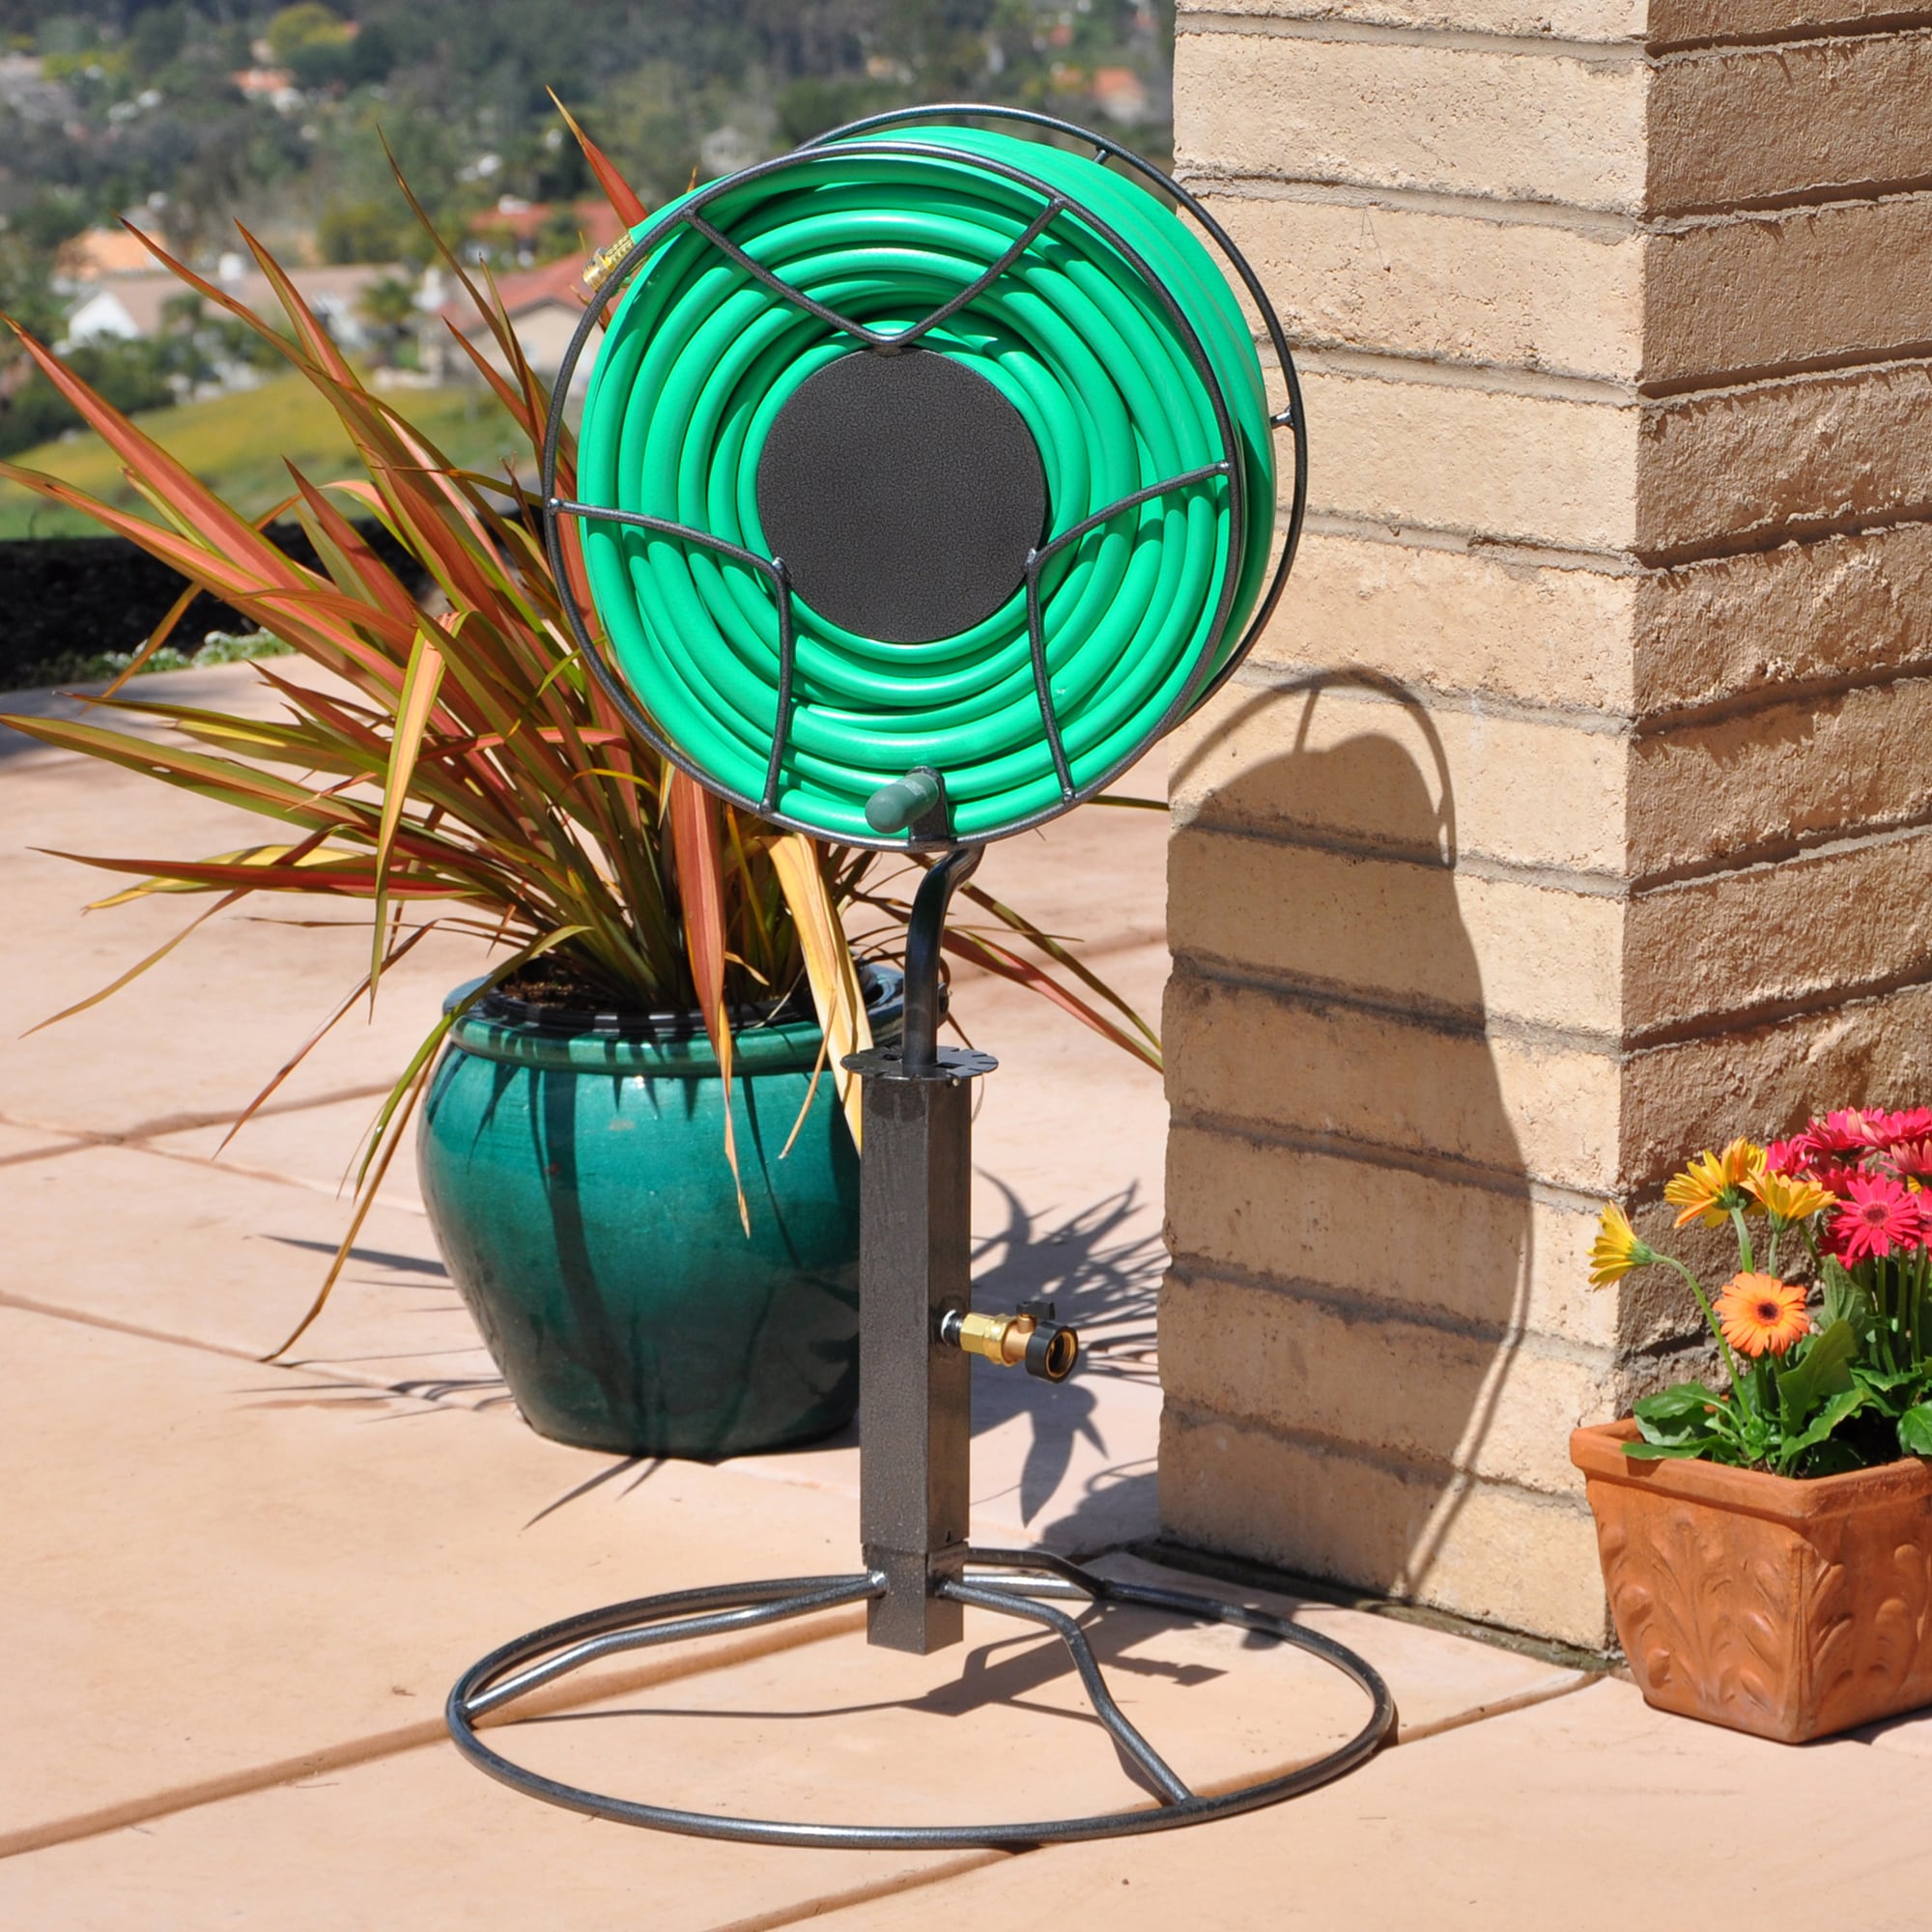 Hose Reel - Stanford Home Centers